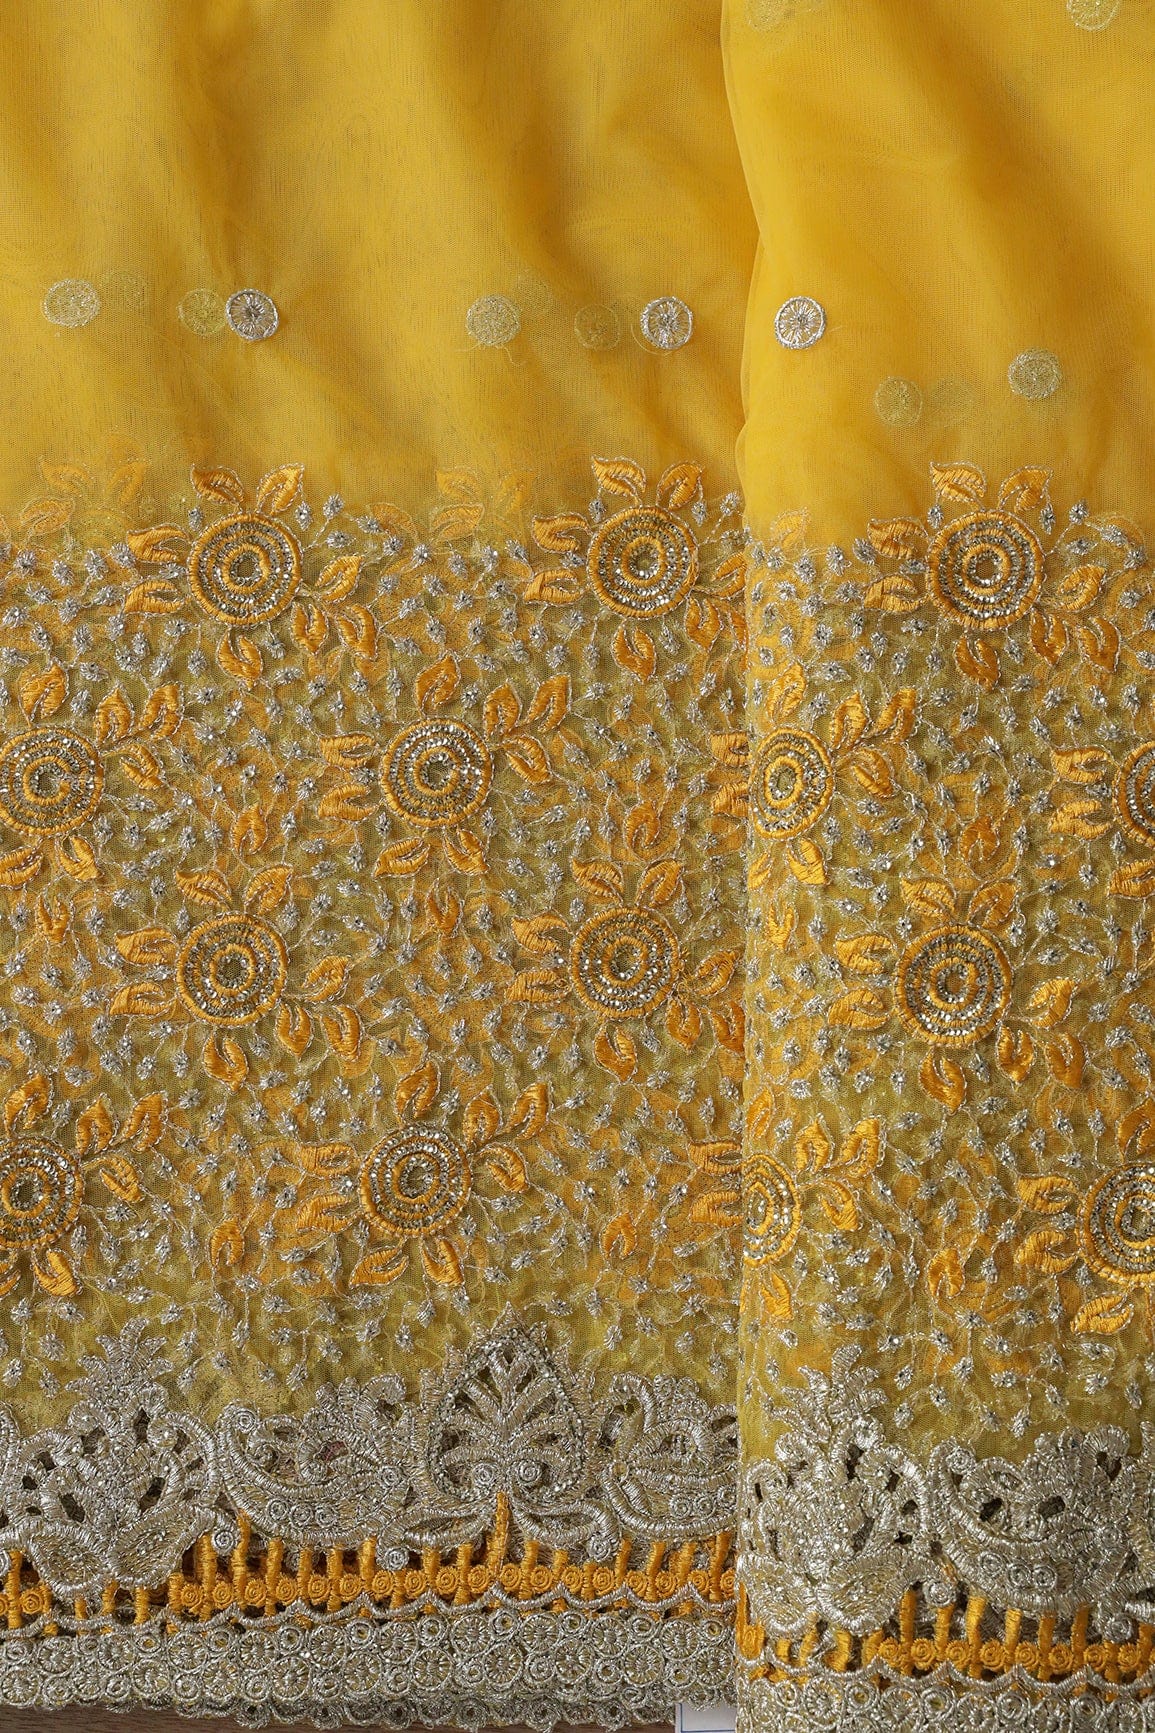 doeraa Embroidery Fabrics Big Width''56'' Yellow Thread With Zari Floral Embroidery Work On Yellow Soft Net Fabric With Border